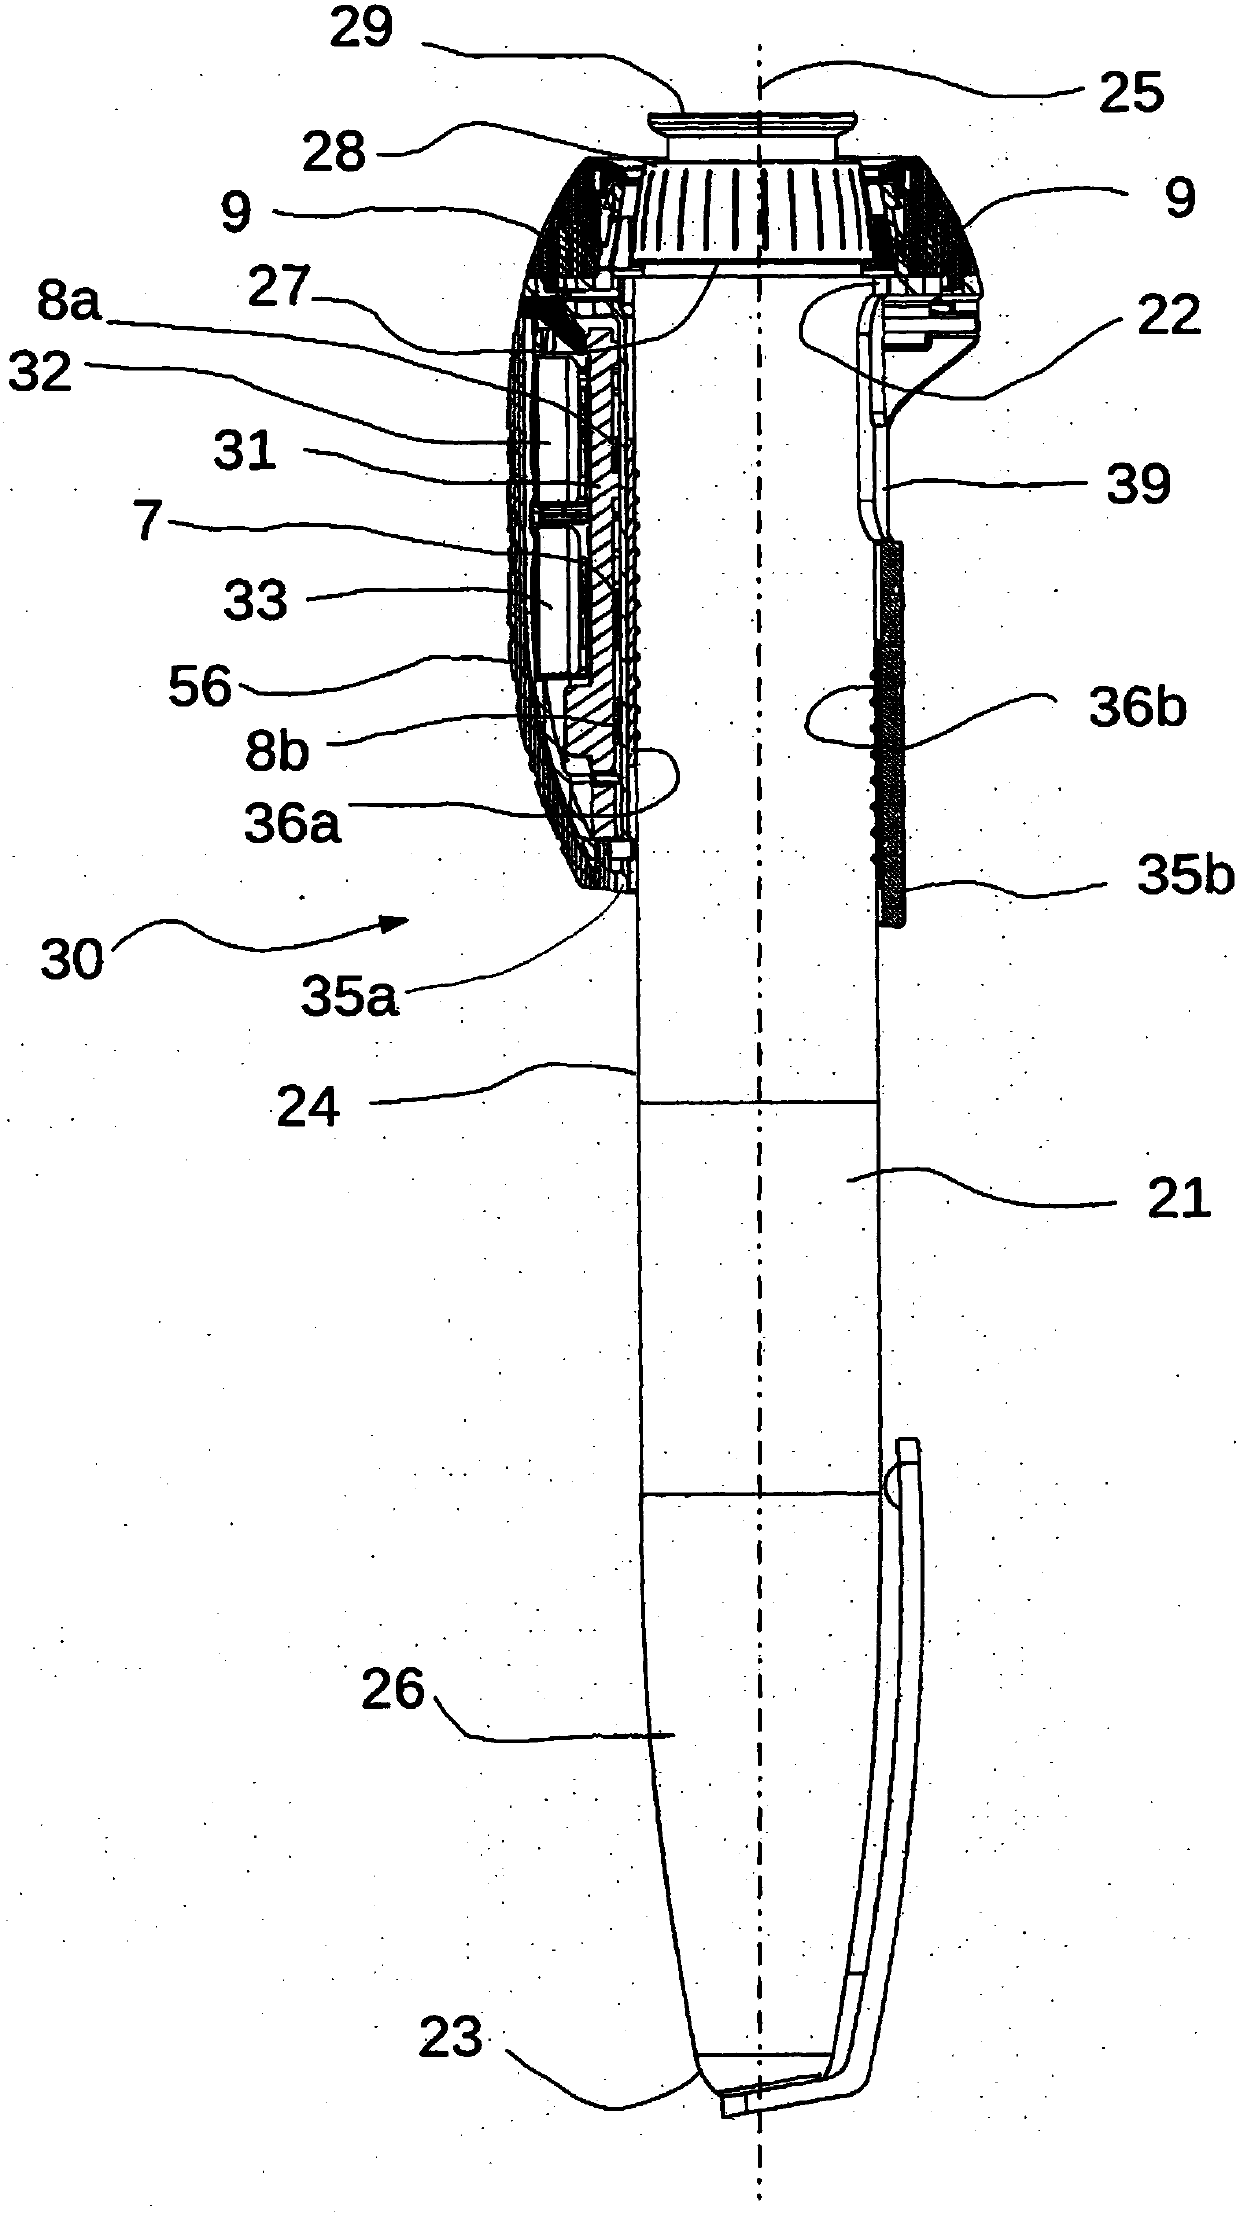 Dose control device for injectable-drug delivery devices